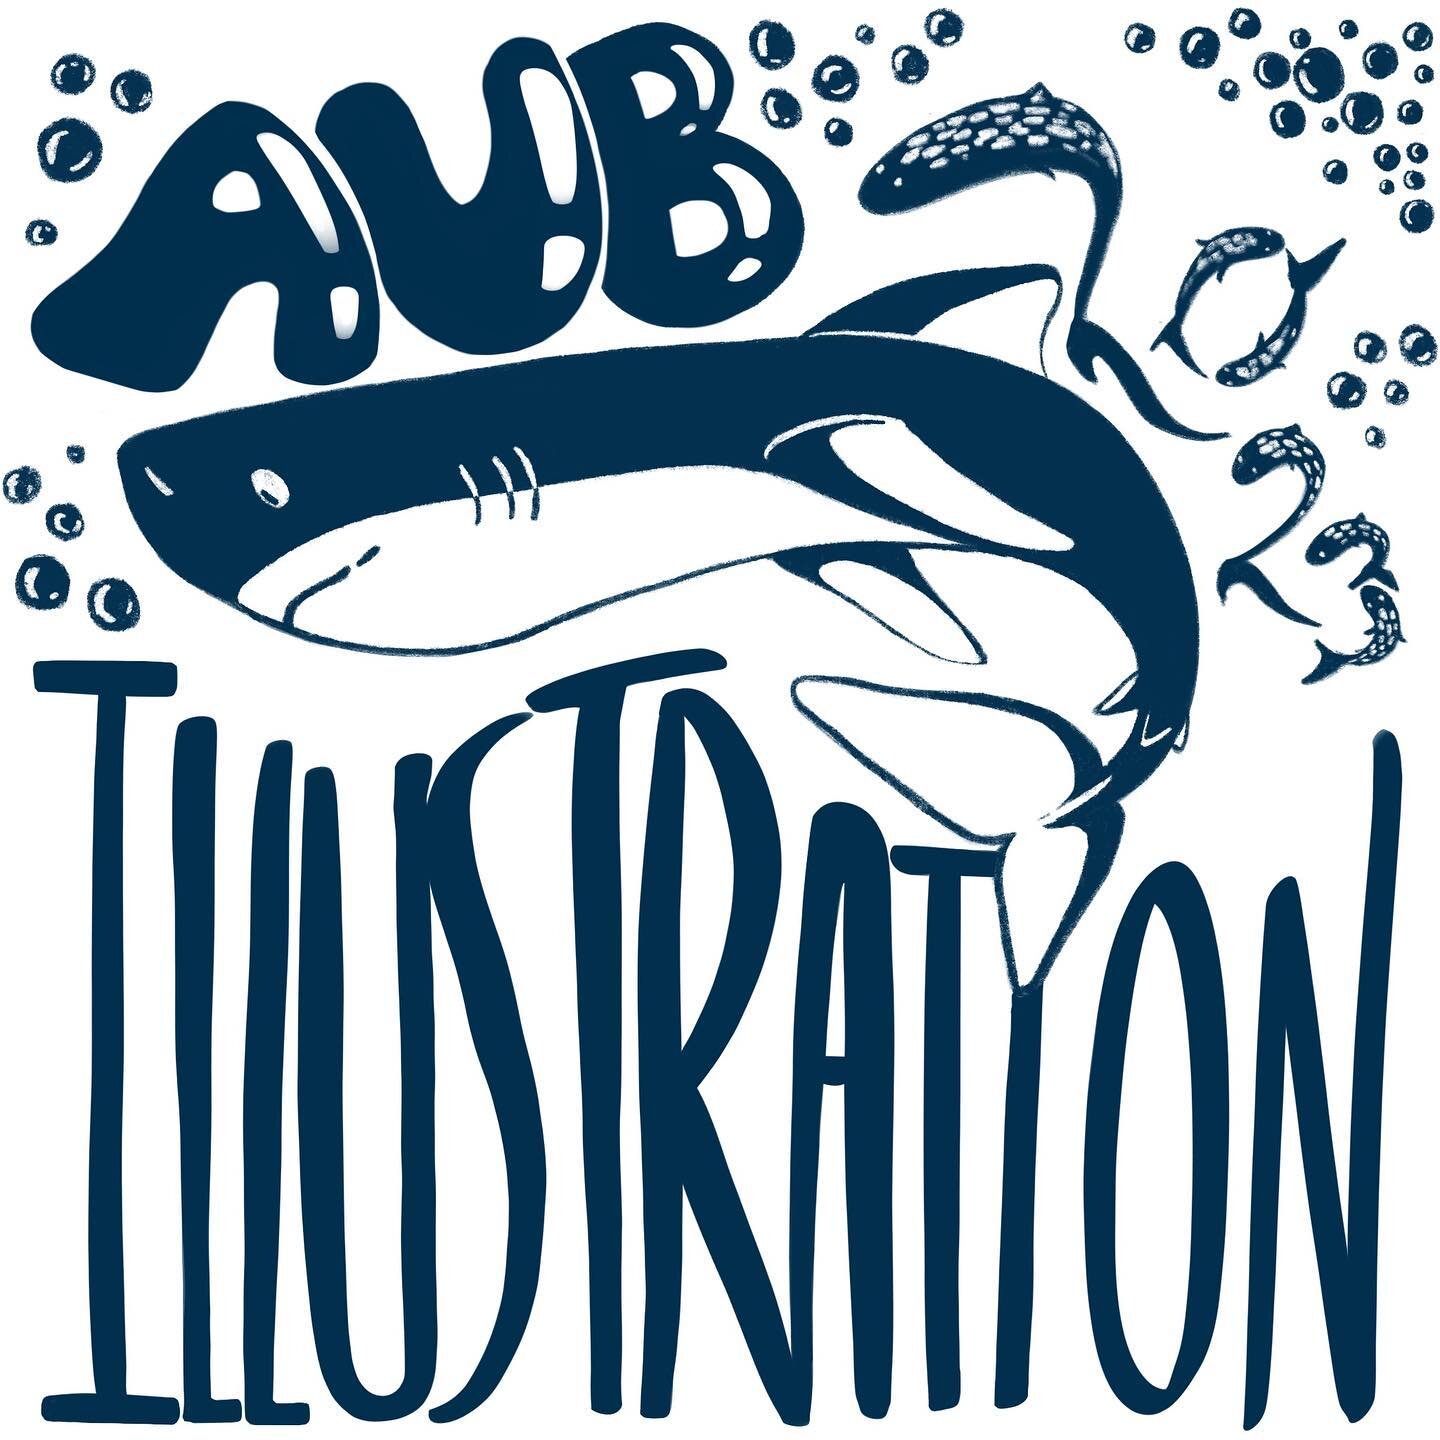 2023 Bag design for #aubill6 
.
.
.

Sharks are cool🦈